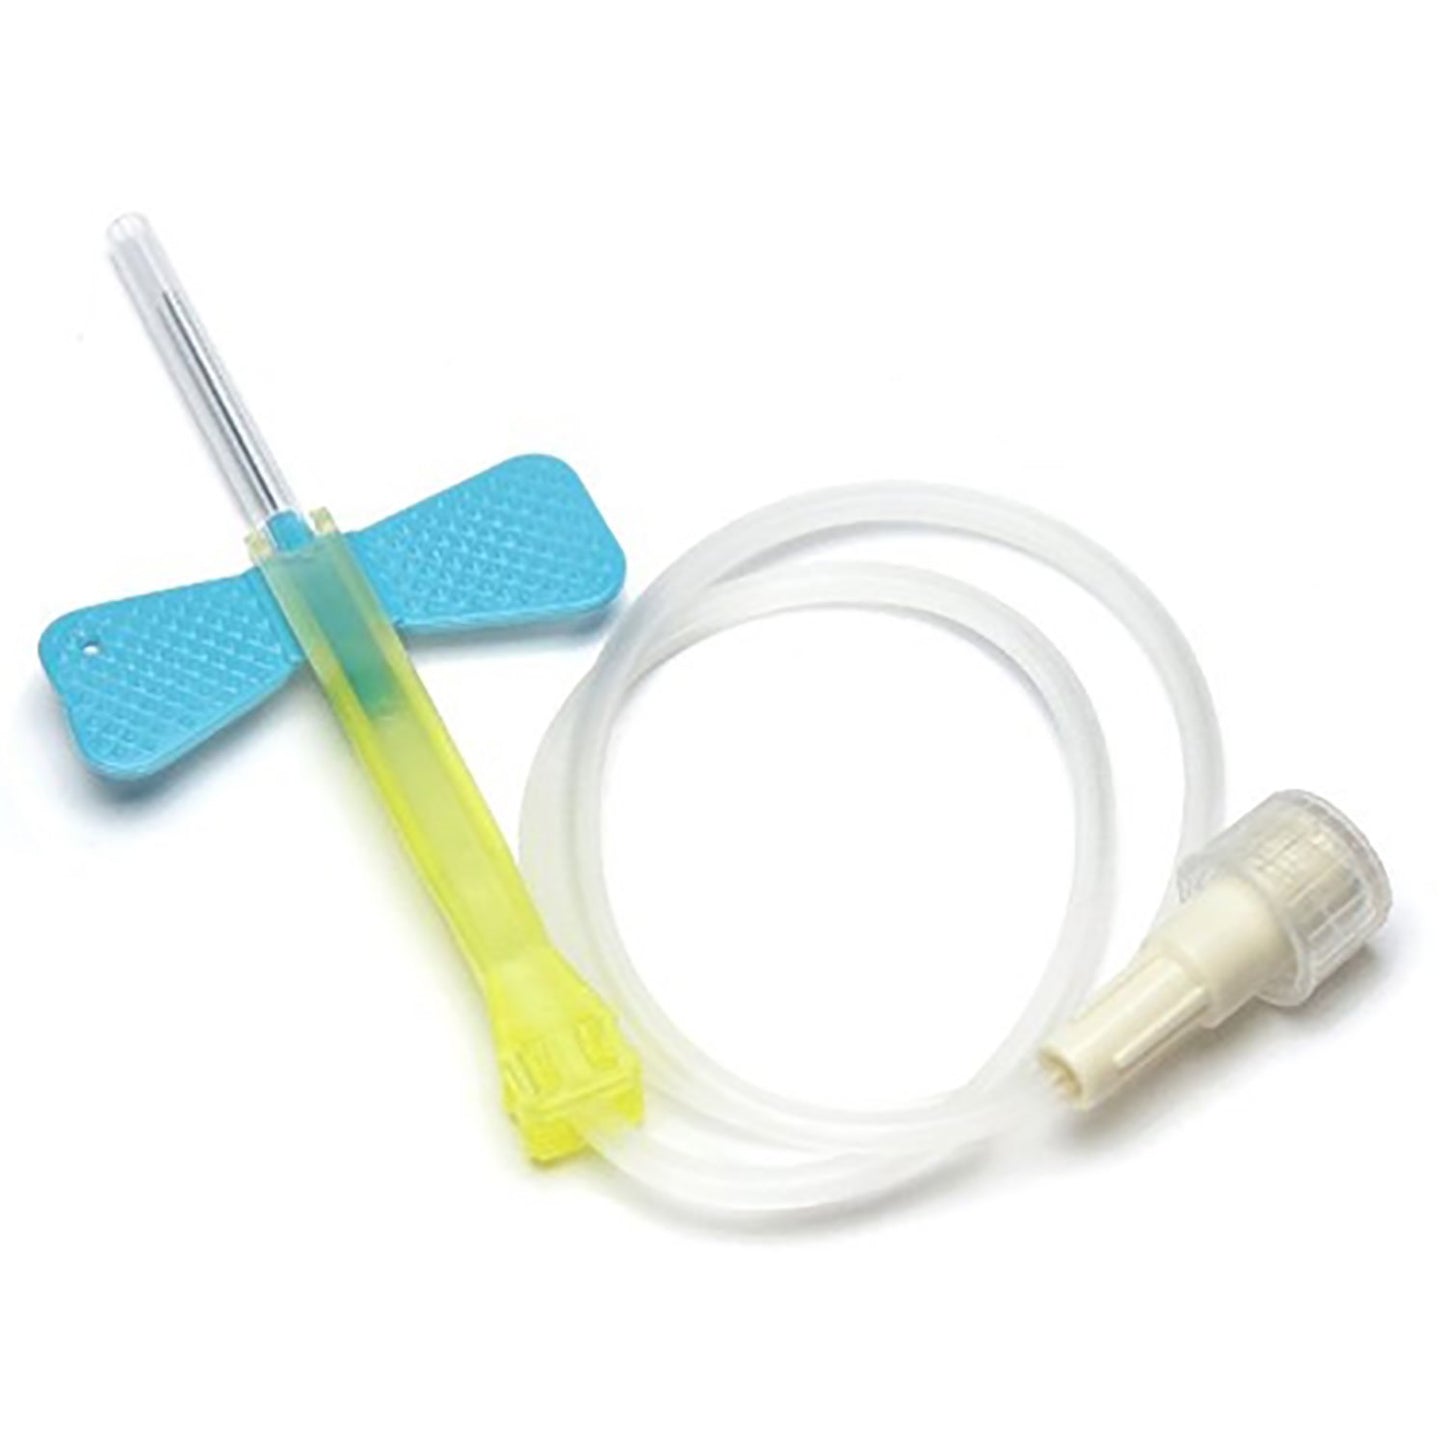 BD 367298 Blood Collection Set | 25G x 3-4" Needle| 12" Tubing, No Luer Adapter - 50 per Box